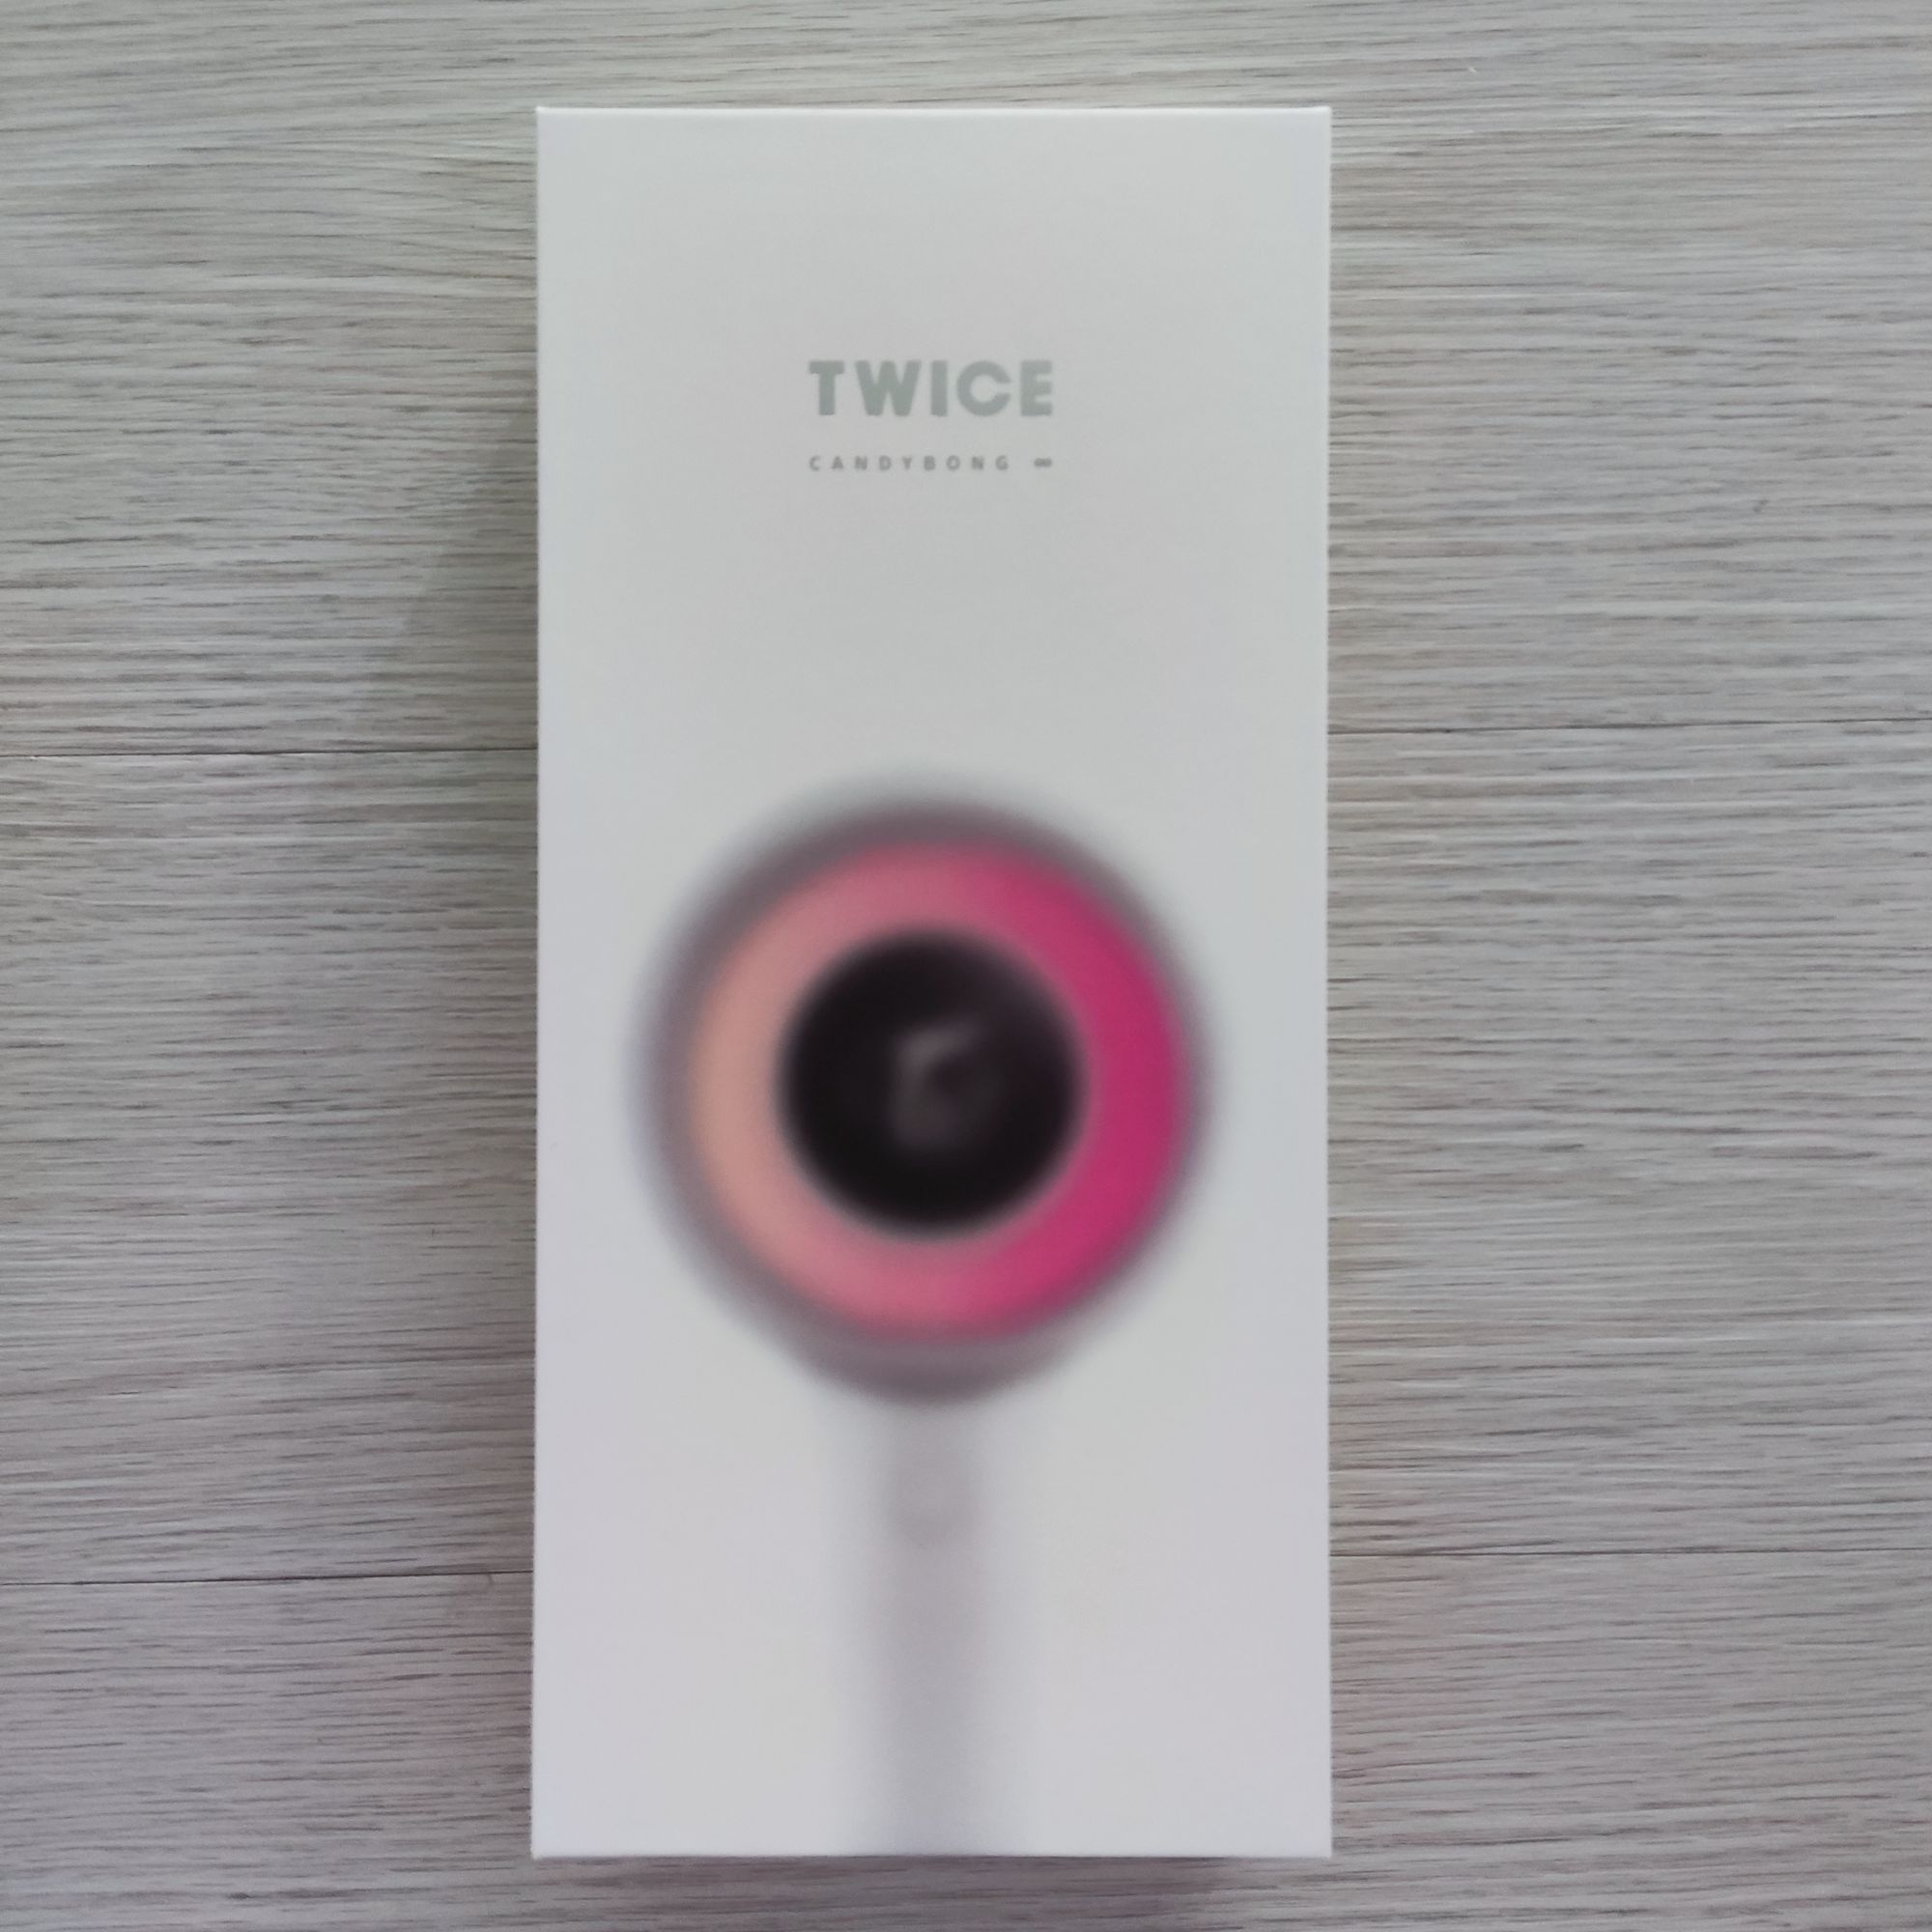 Kpop TWICE Lightstick Ver3 Official Infinity Version 3 CANDY BONG Z Ver 2  with Bluetooth Concert LED Glow Flashlight Room Decor